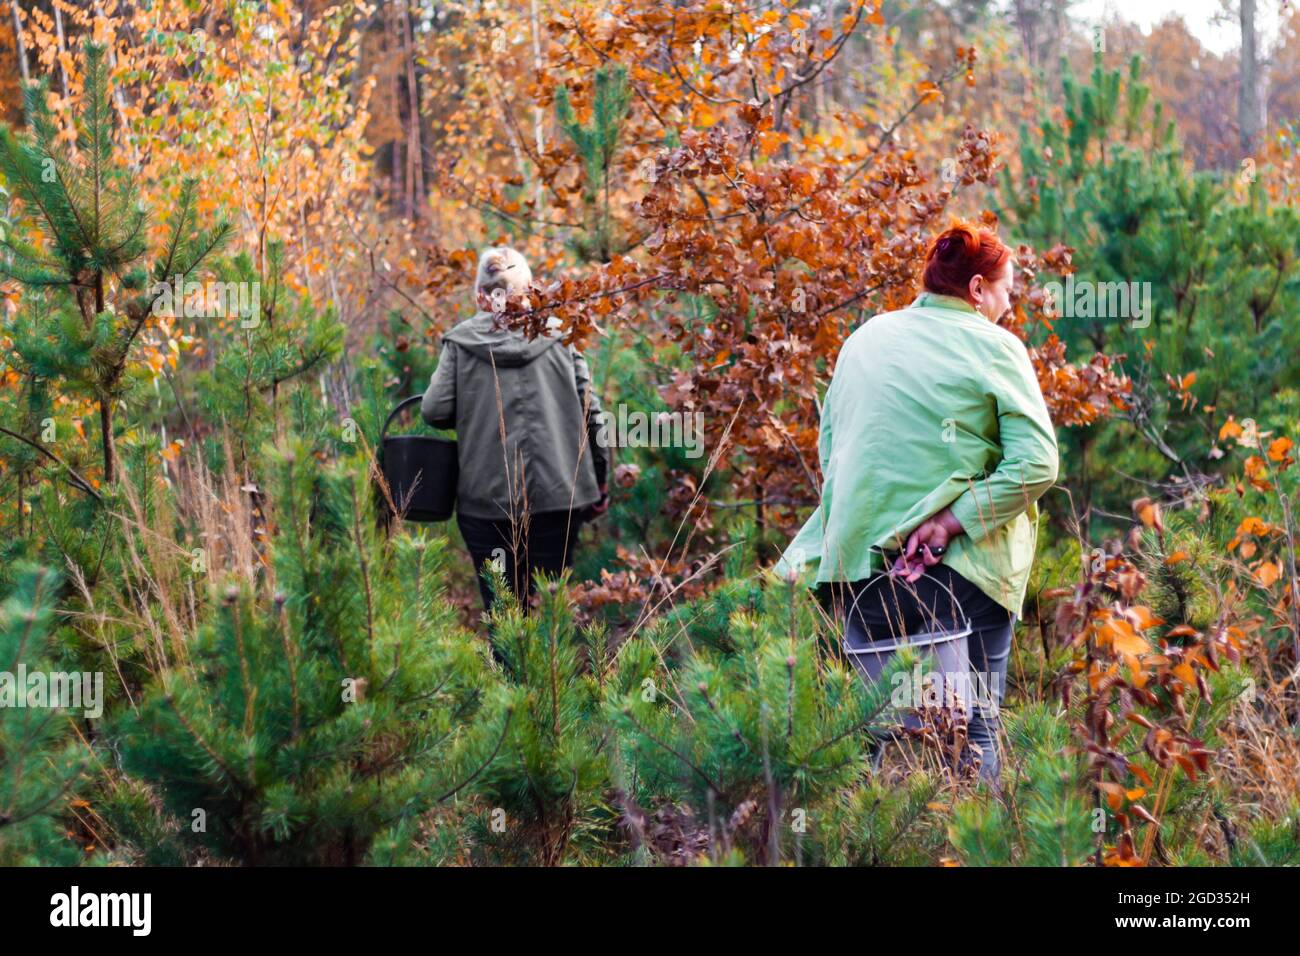 Mushroom pickers gather mushrooms in the forest. View from the back. Two women. Company in nature. Autumn landscape. Friendship. Selective focus. Stock Photo